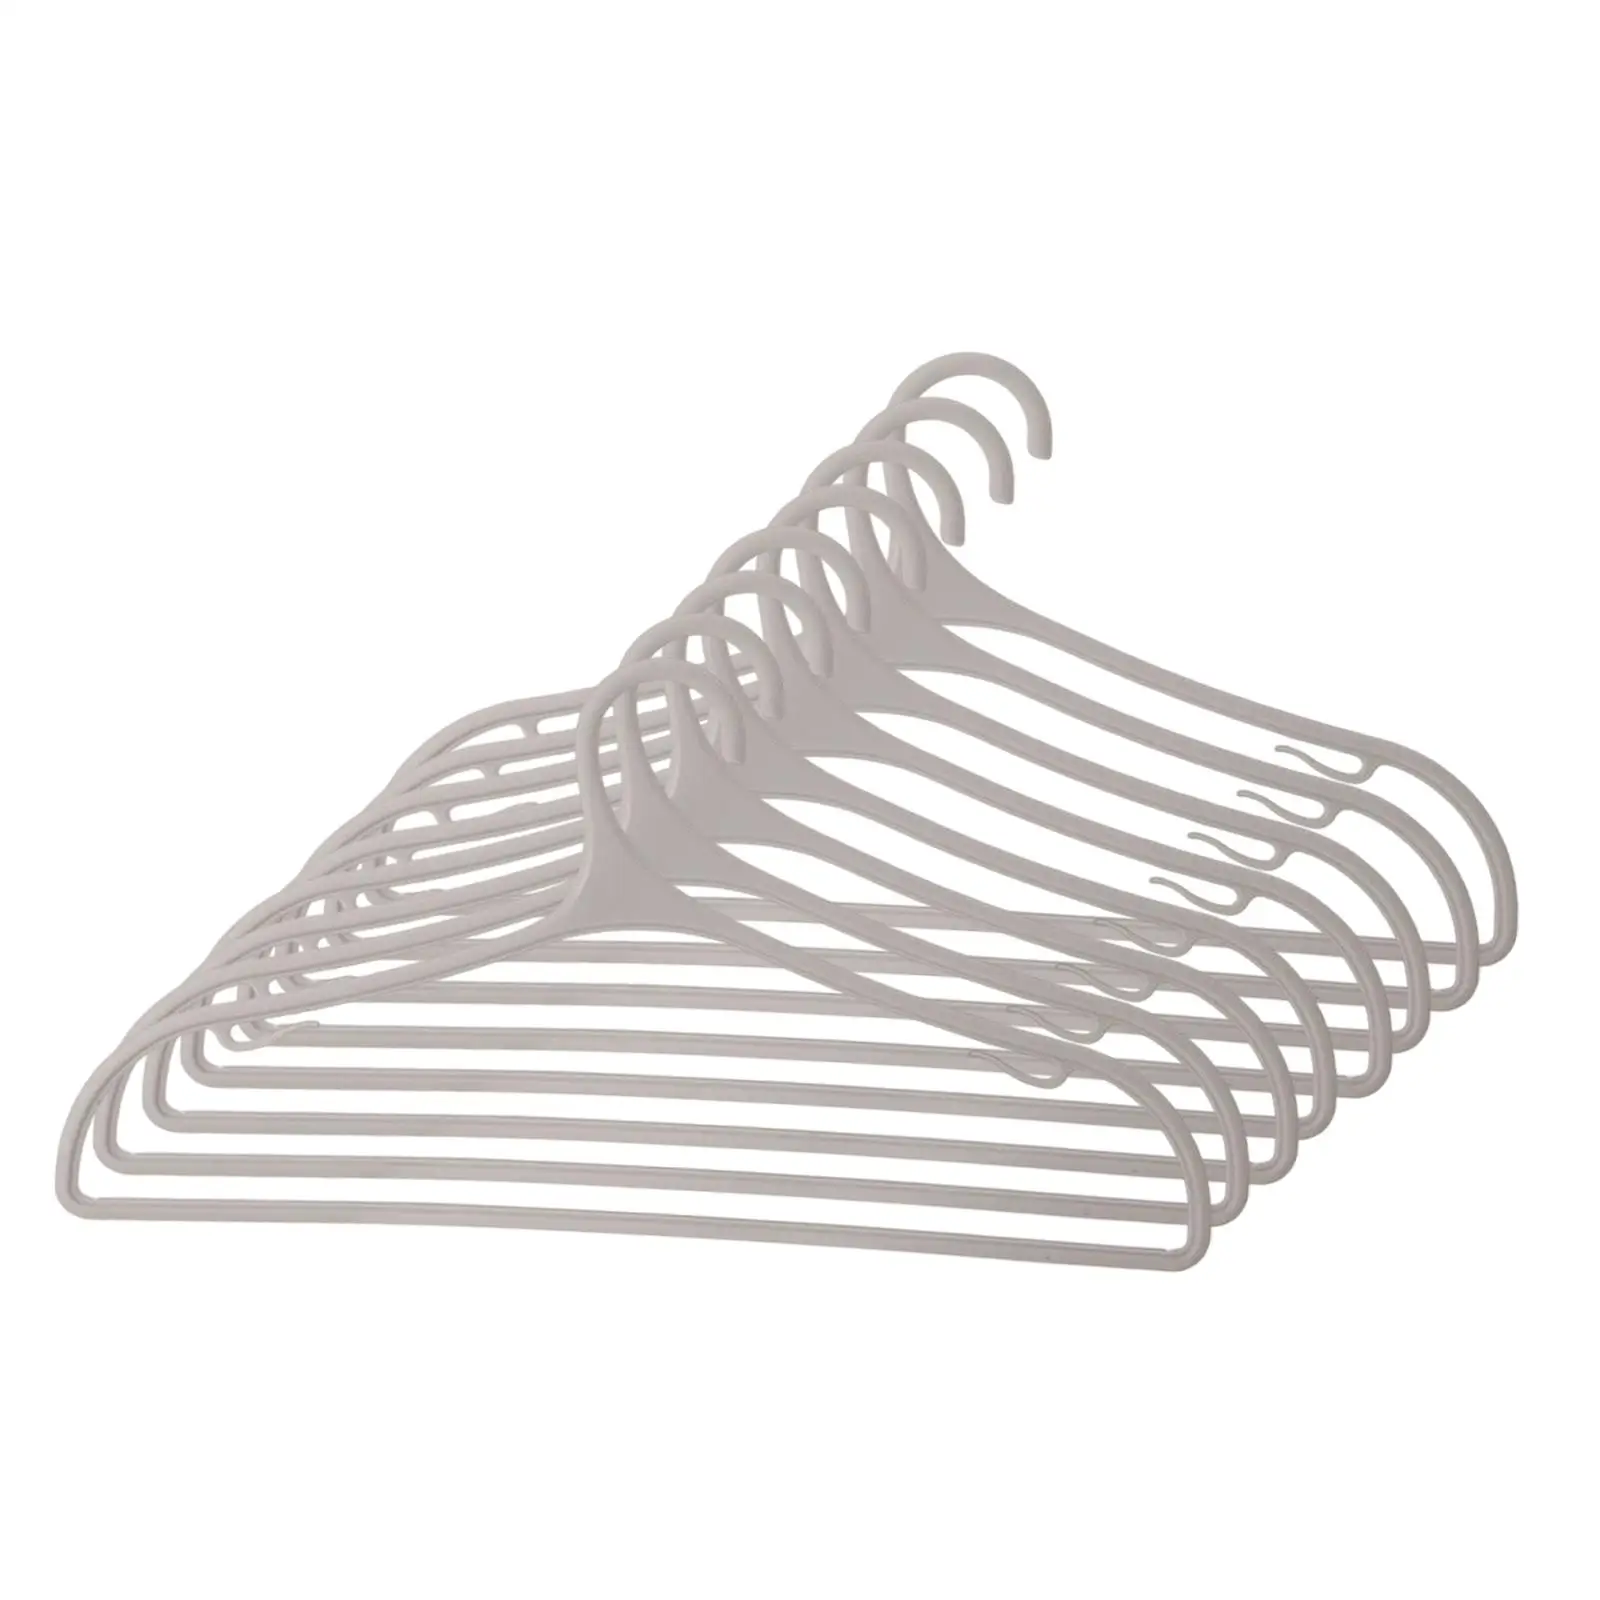 8x Suit Hangers Wide Shoulder Hanging for Laundry Room Household Living Room